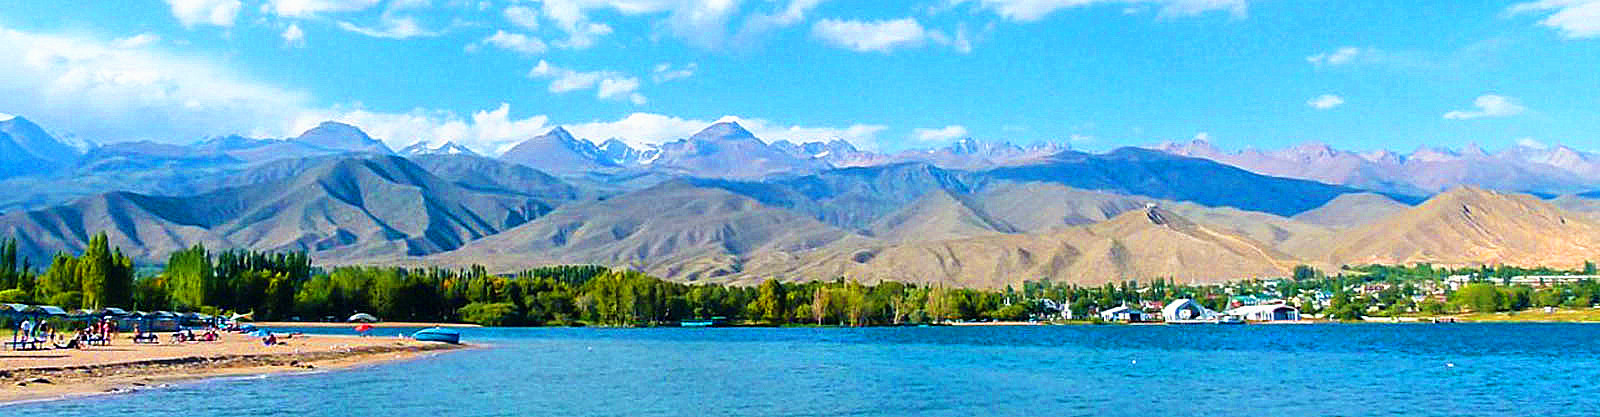 Silk Road Tours in Central Asia